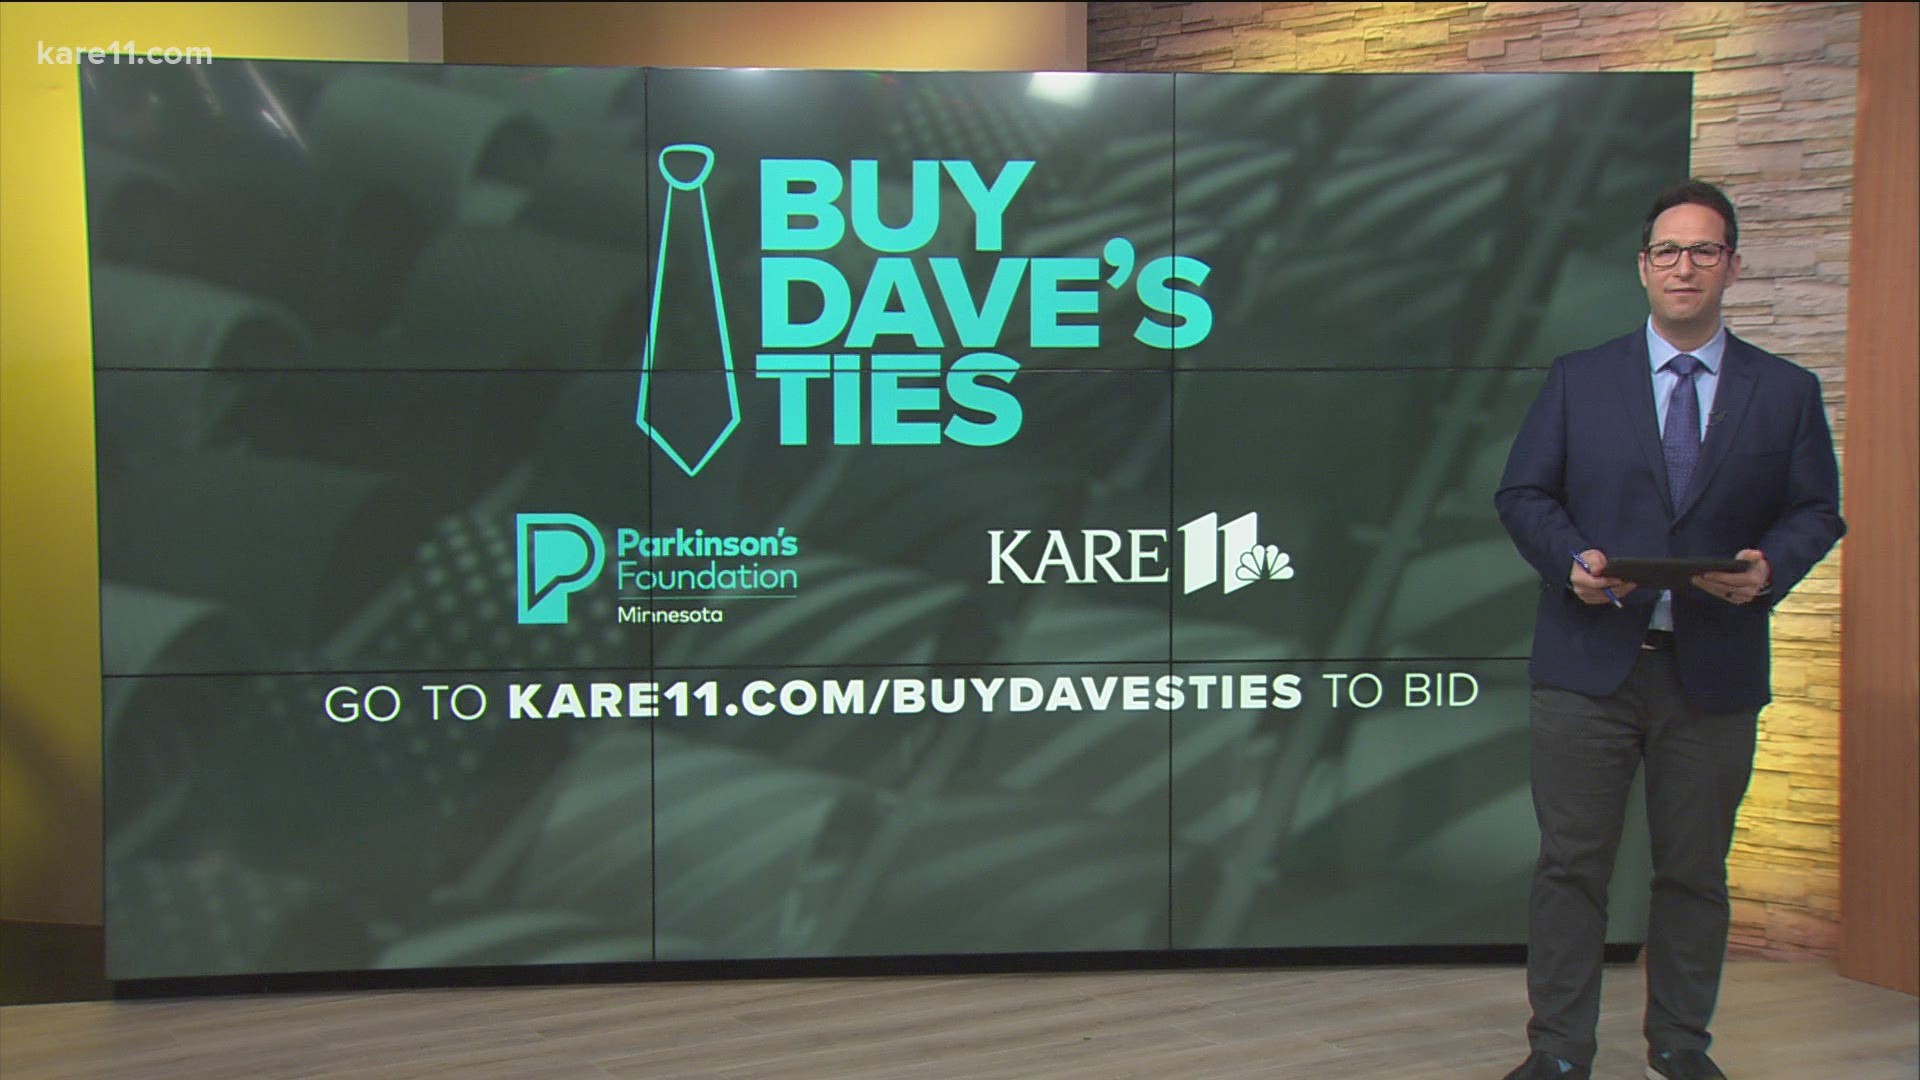 KARE 11's Dave Schwartz speaks to local medical professionals about fundraising for people with Parkinson's.